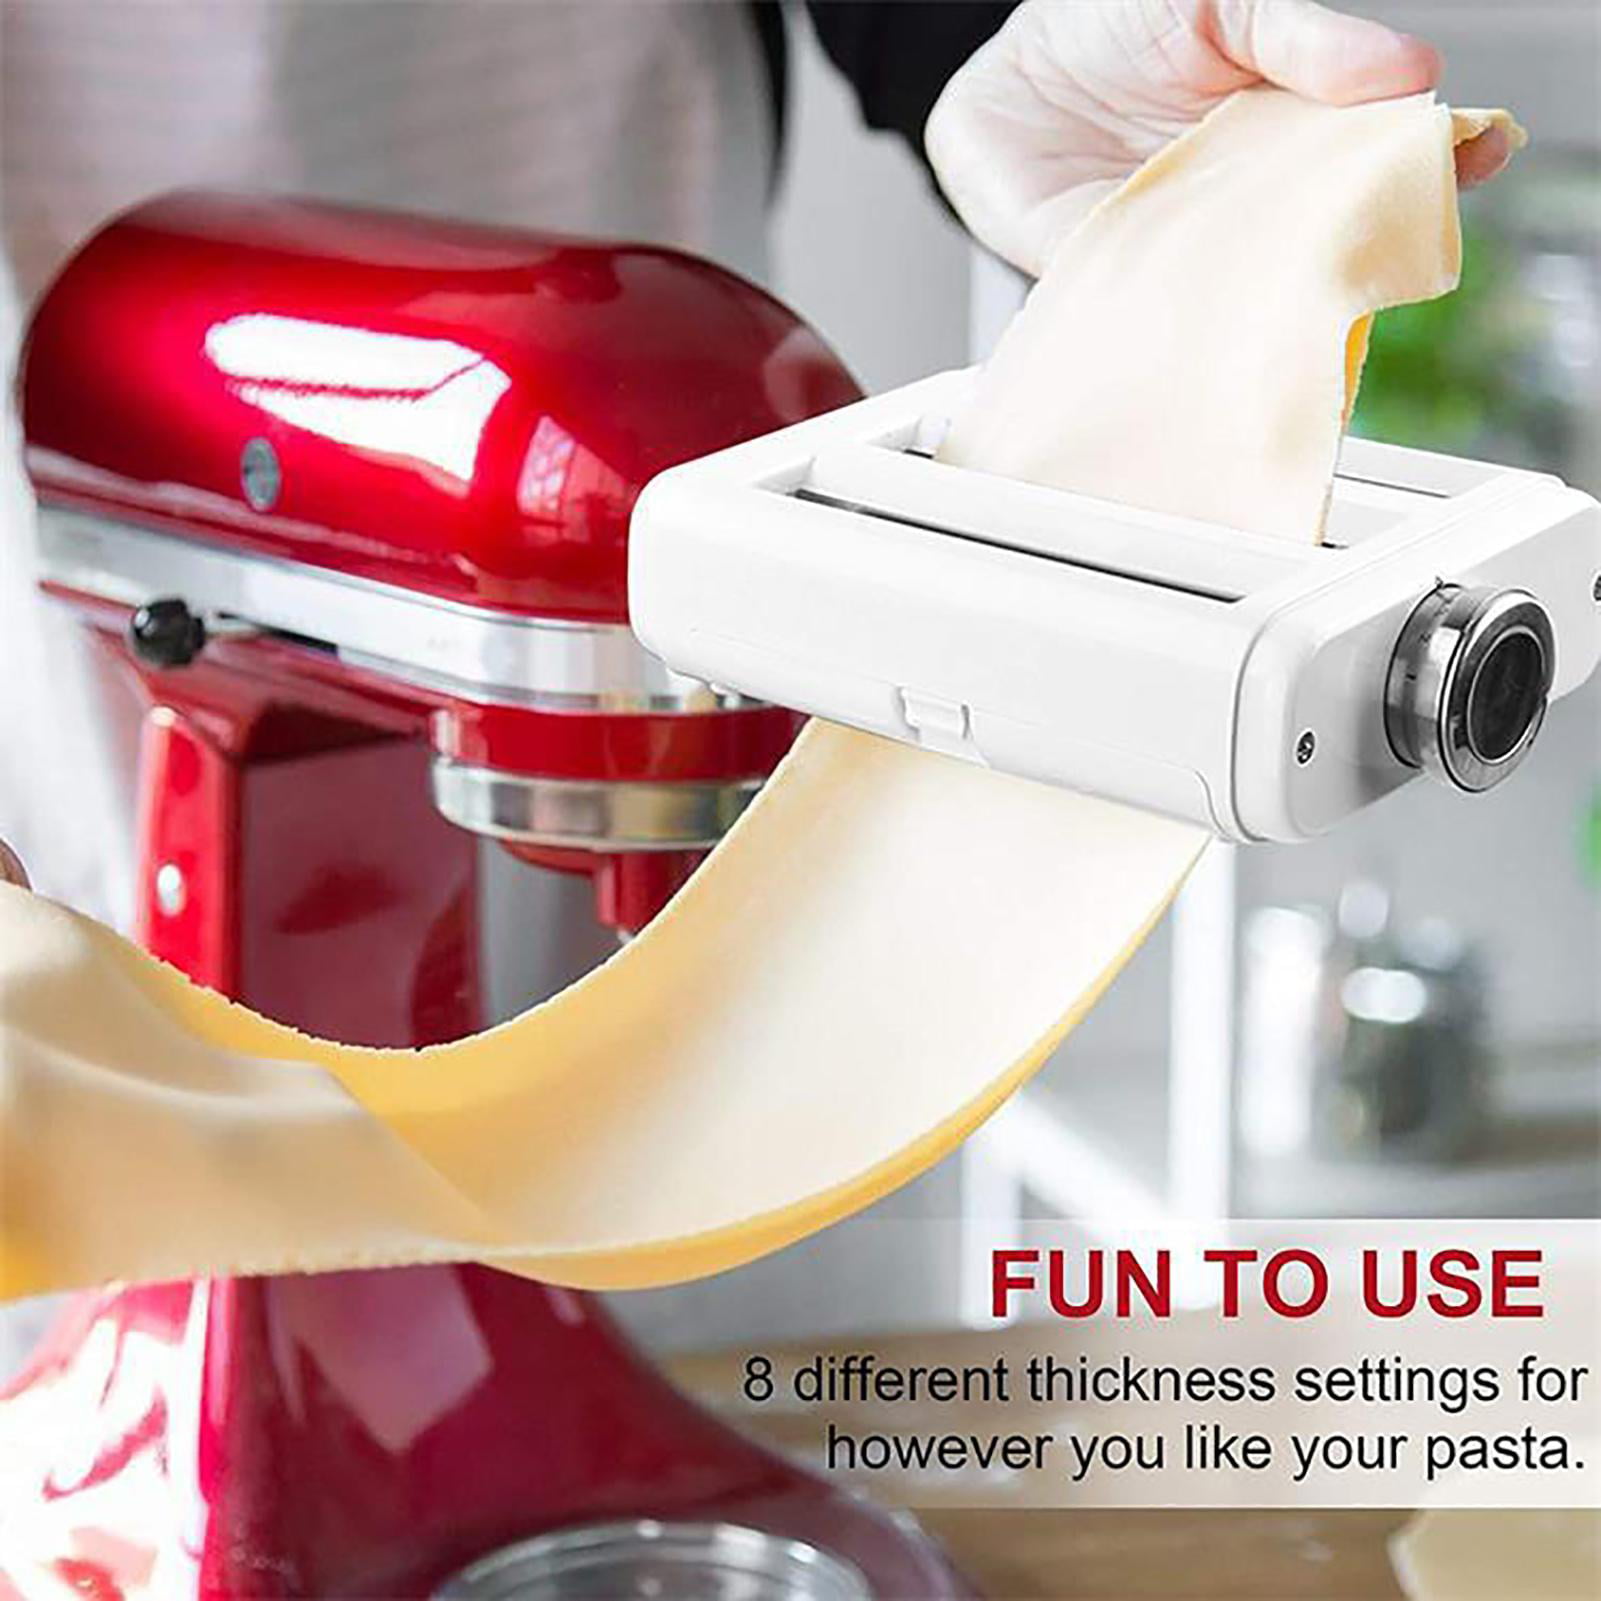 KitchenAid Vegetable Sheet Cutter Attachment with Noodle Blade KSM2SCA